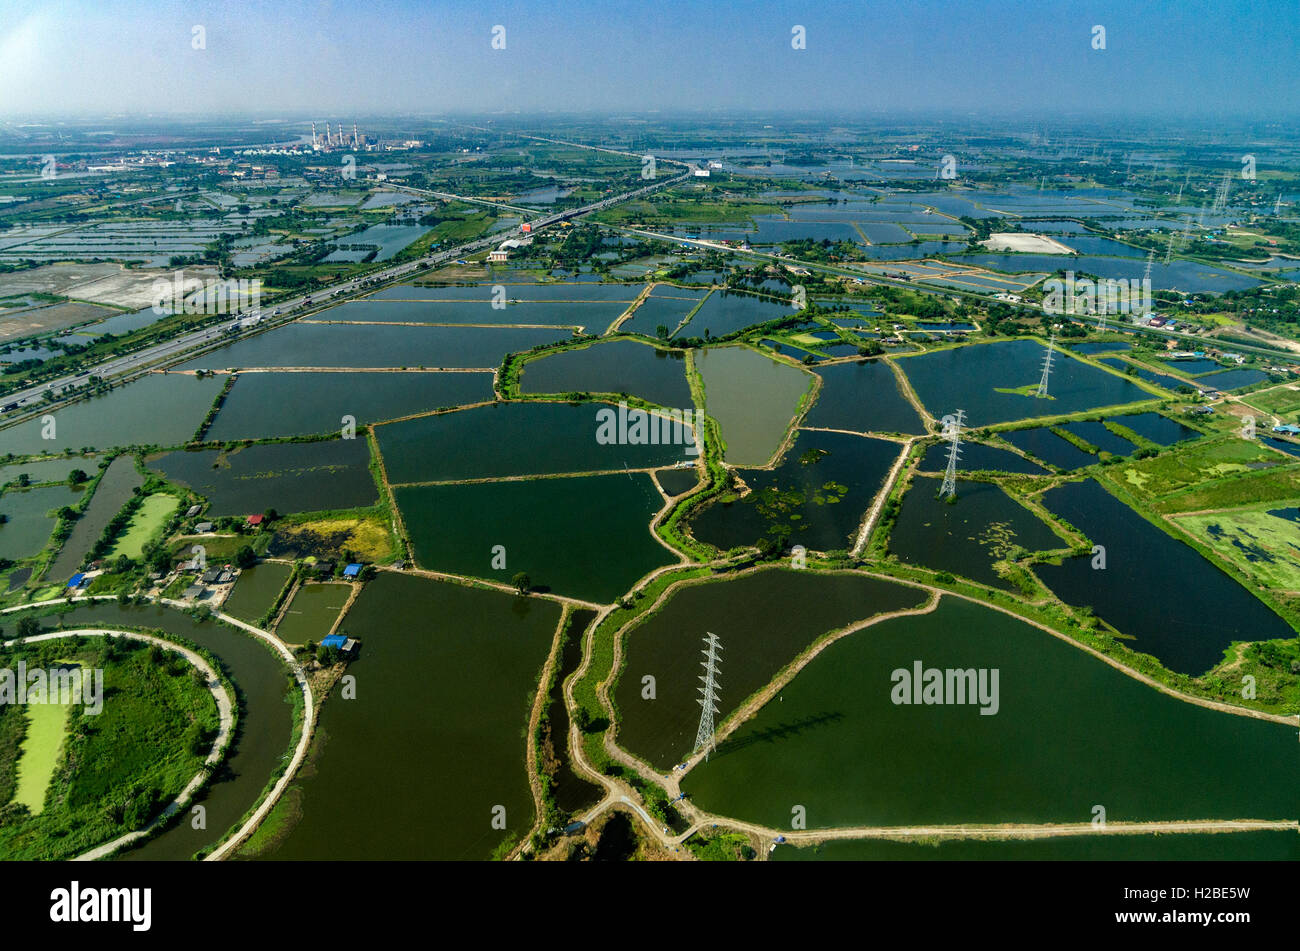 Farmland rice fields under the water in Thailand Aerial photo Stock Photo